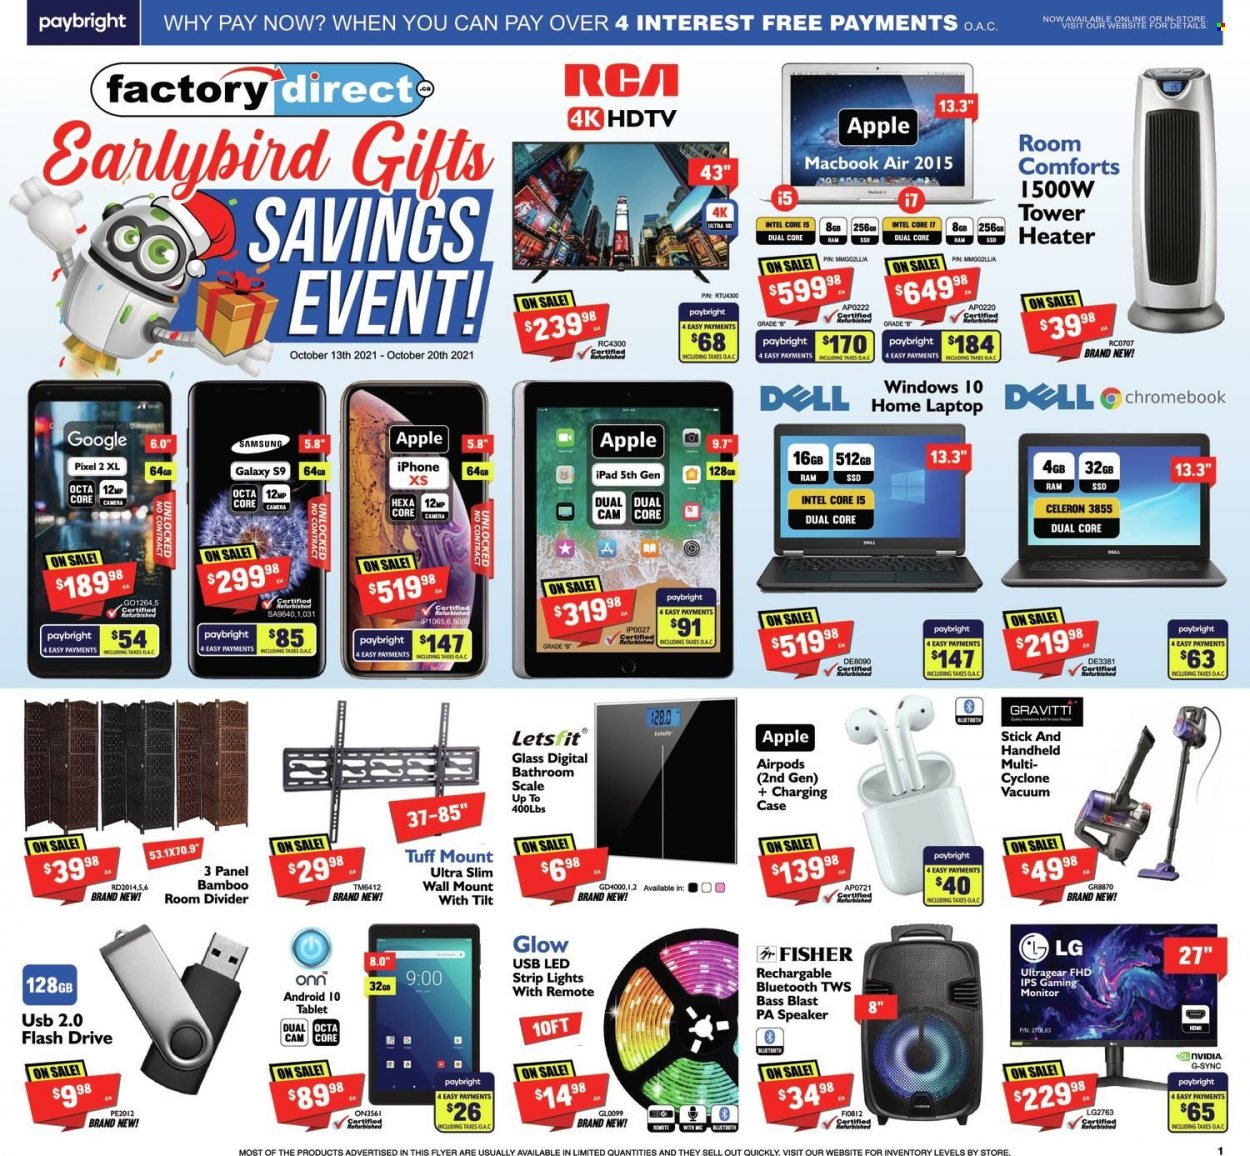 thumbnail - Factory Direct Flyer - October 13, 2021 - October 20, 2021 - Sales products - Intel, Apple, tablet, iPad, scale, personal scale, pin, Samsung, iPhone, laptop, chromebook, MacBook, MacBook Air, flash drive, RCA, UHD TV, ultra hd, HDTV, speaker, Airpods, camera, Dell, LG, monitor, iPhone XS. Page 1.